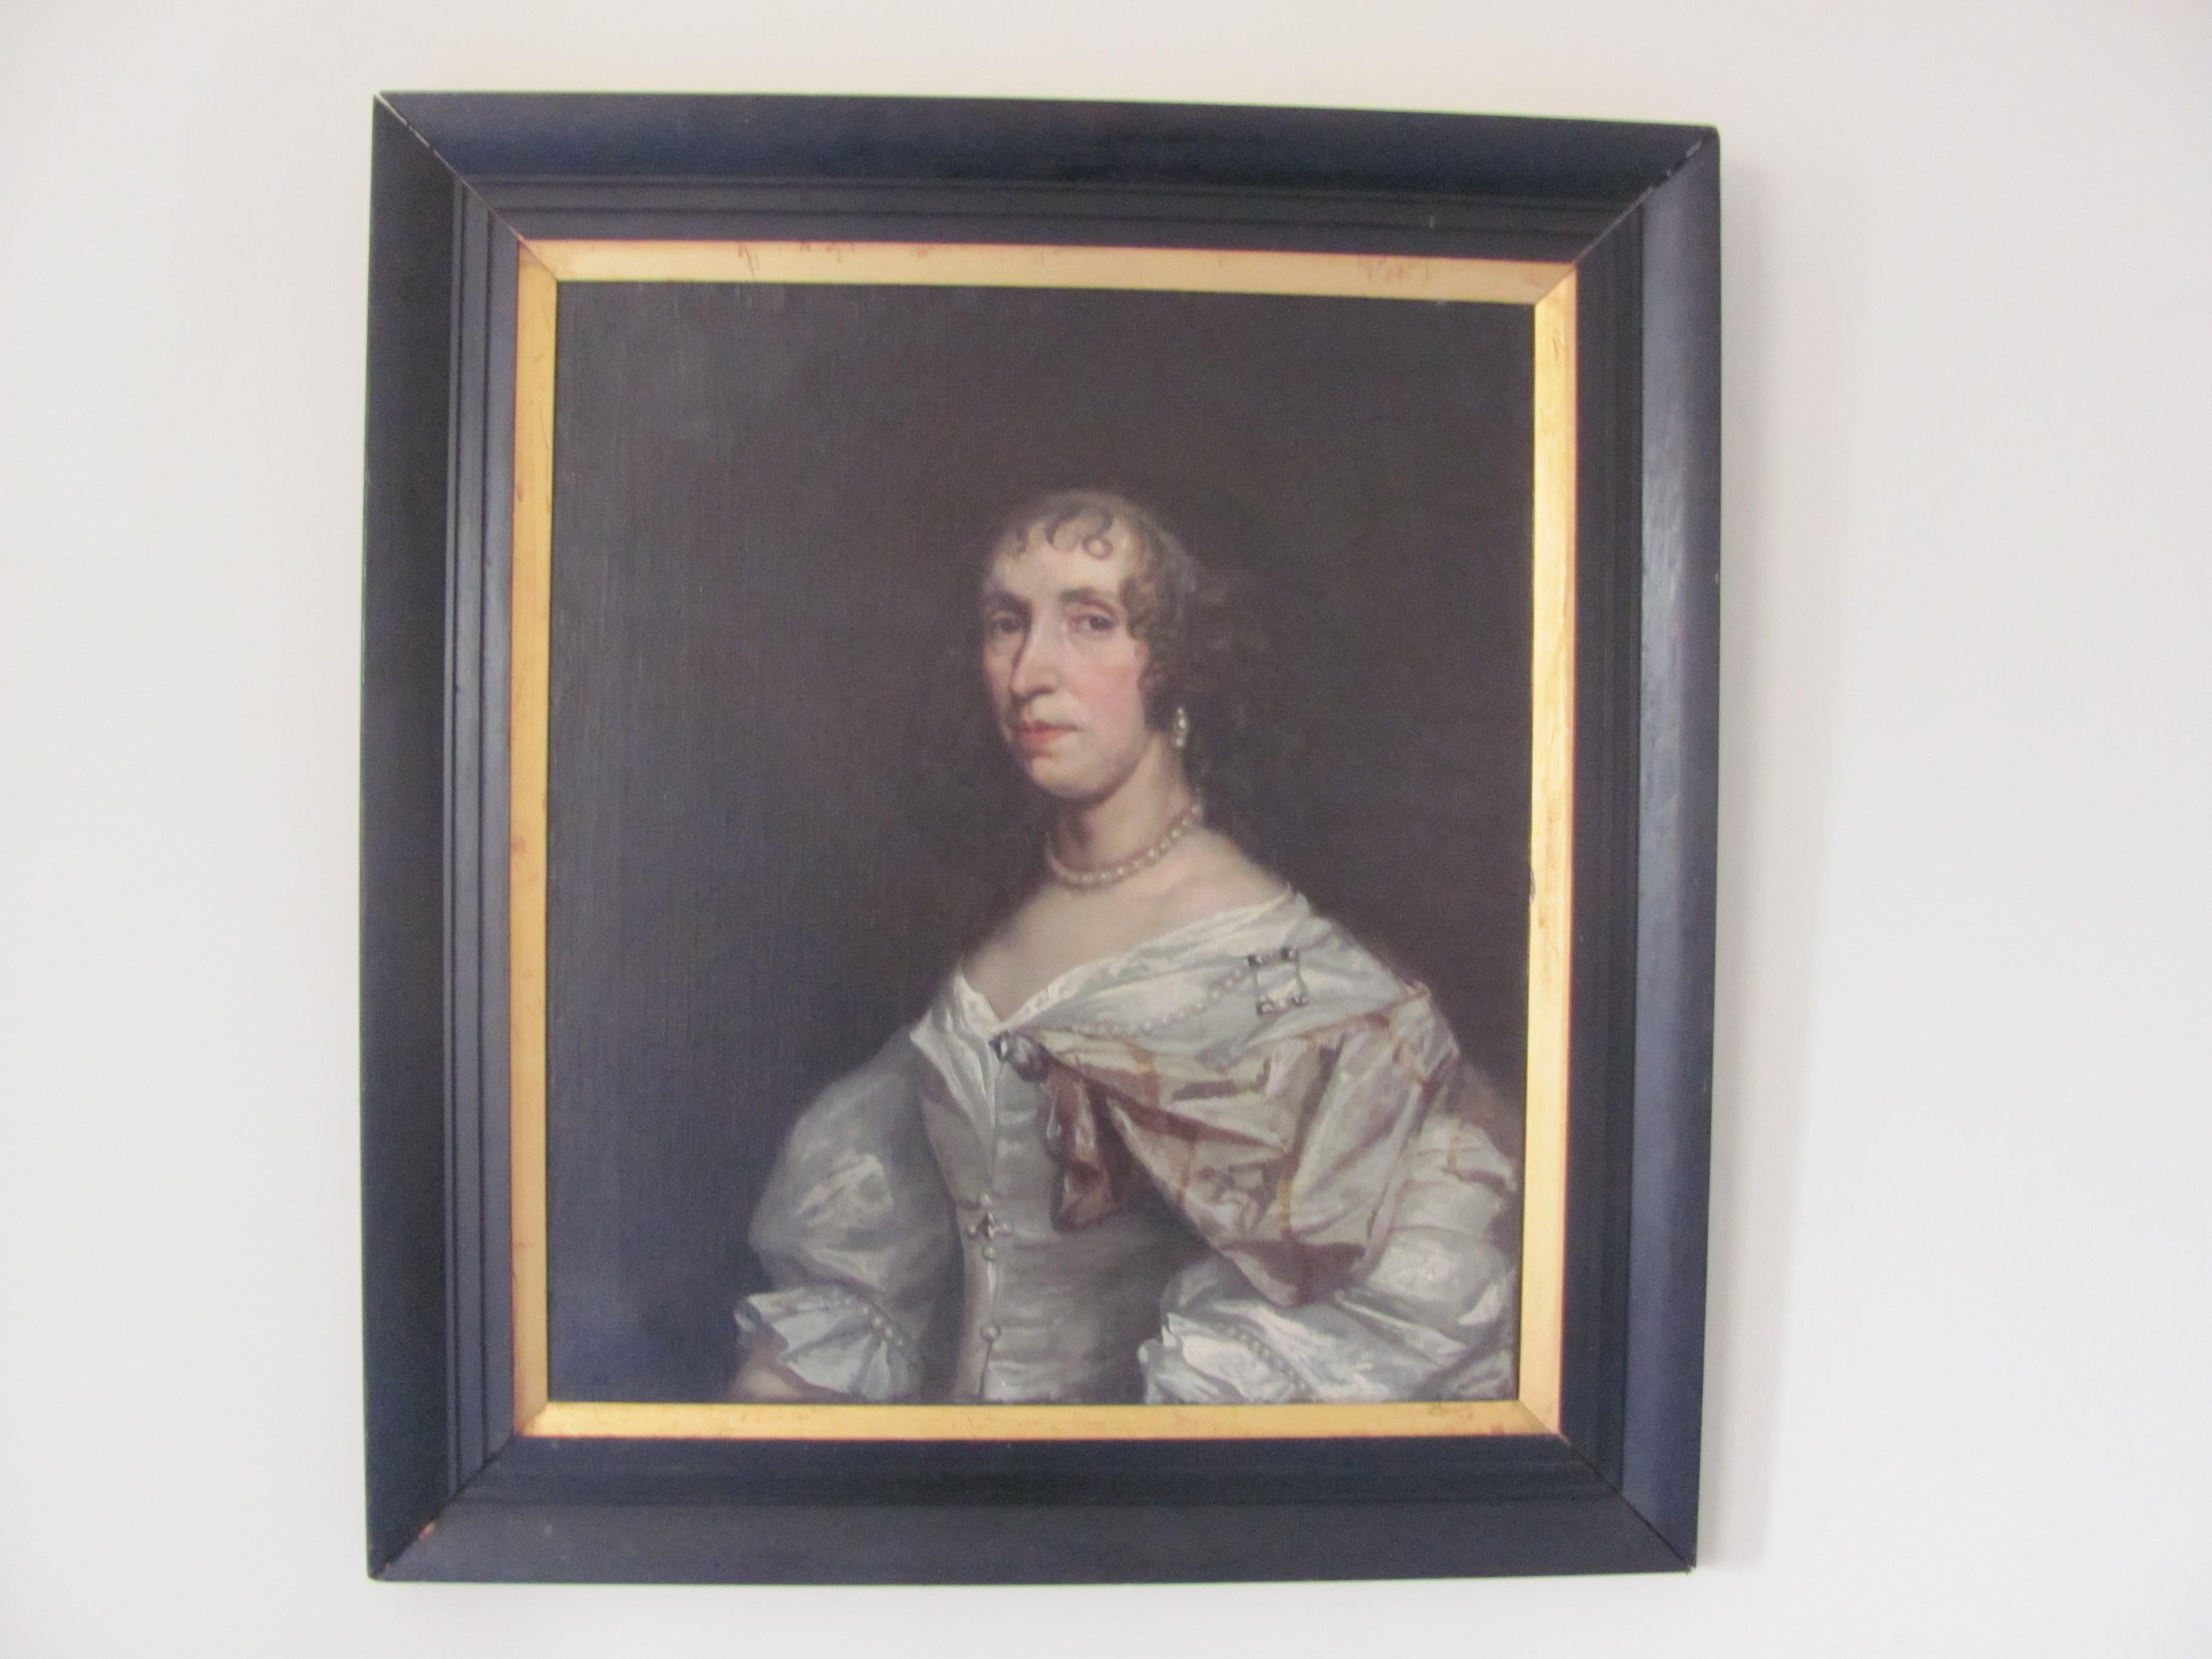 sir peter lely (follower of) Portrait Painting - 18th century antique portrait of an aristocratic lady, follower peter lely